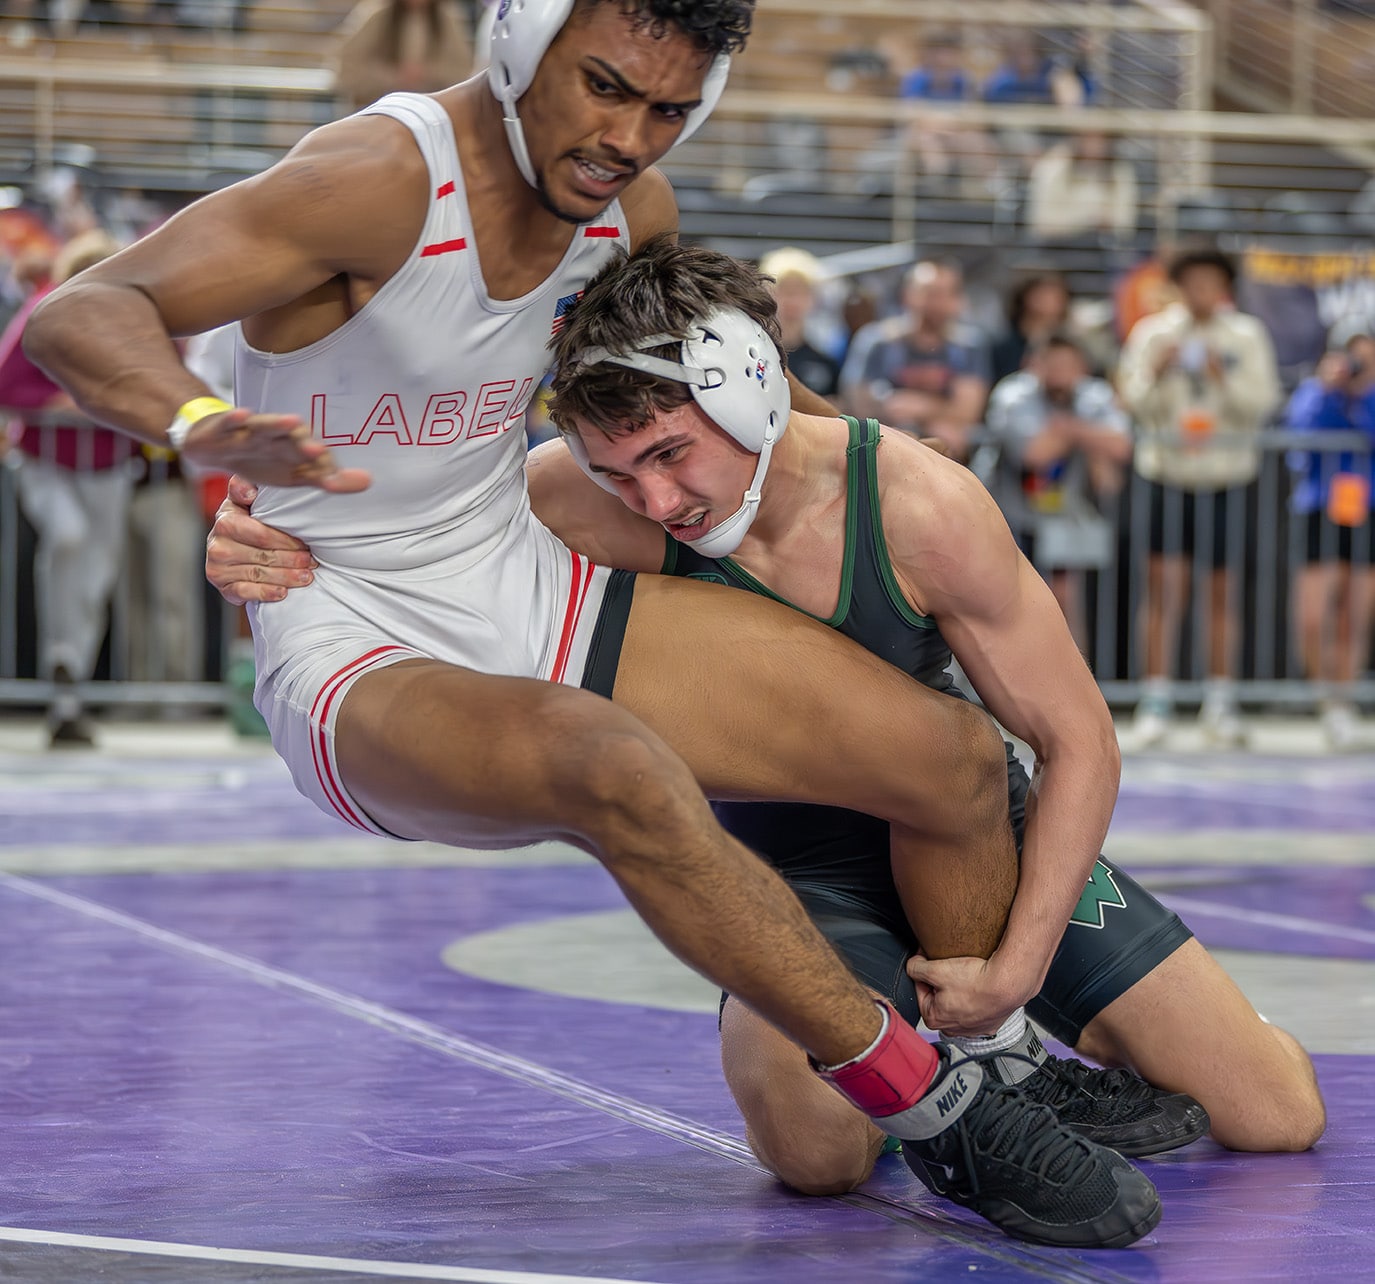  Weeki Wachee 144 pound Ricky Bowamaster needs overtime to get by Devon Jackson from LaBelle 5-3 at the FHSAA wrestling championships in Kissimmee. [Photo by Joe DiCristofalo]